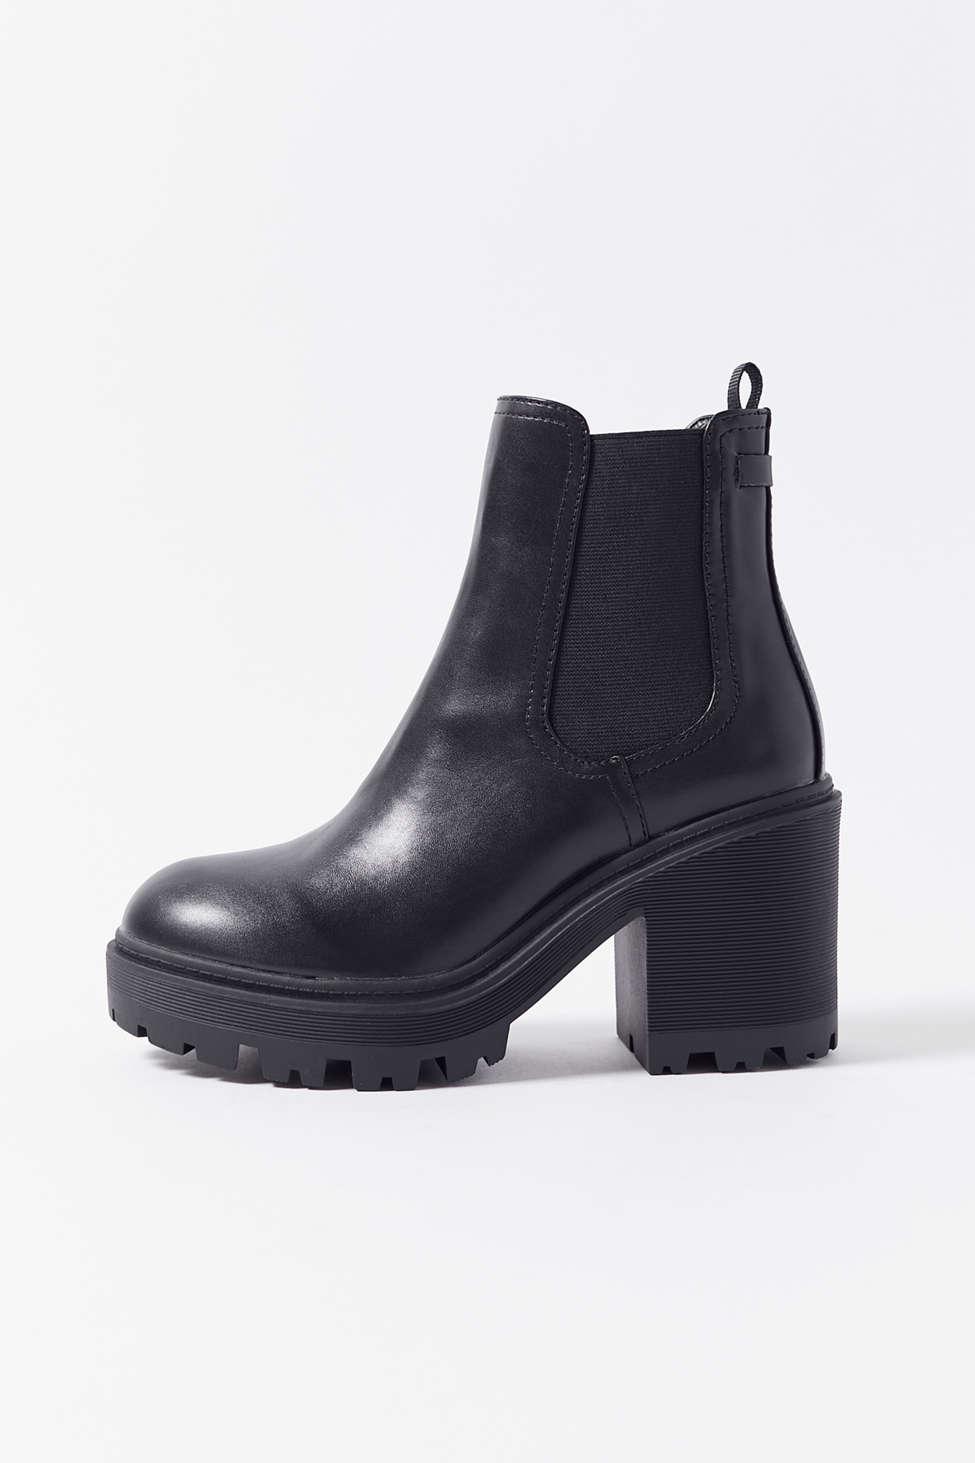 Urban Outfitters Uo Chloe Chelsea Boot in Black - Lyst